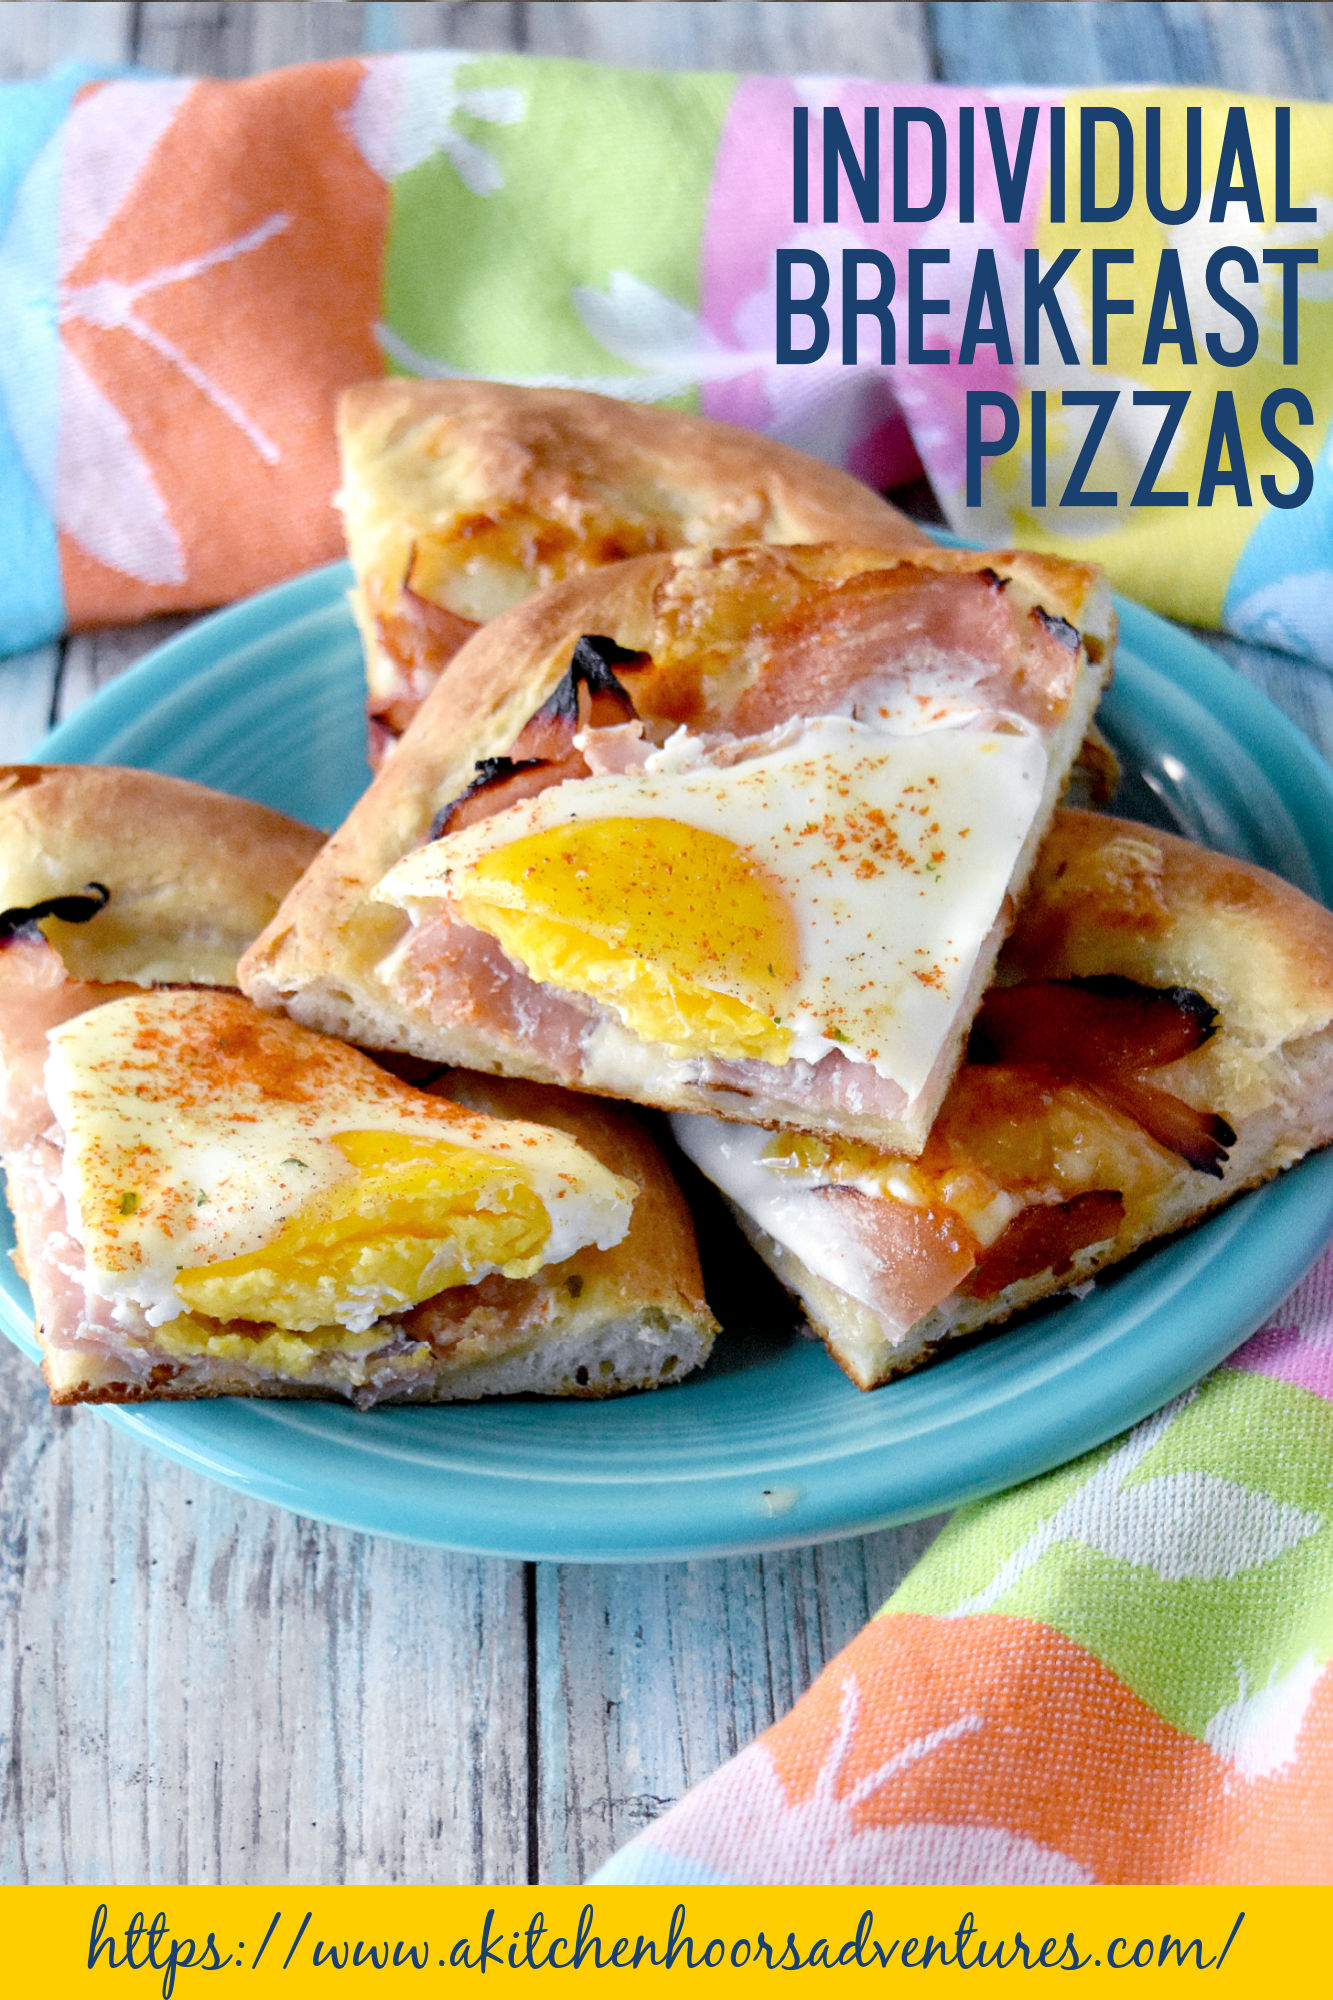 Individual Breakfast Pizzas are easy to prep and even easier to let your guests create and bake their own! Make breakfast pizza bar and let them have fun making their own breakfast pizza.